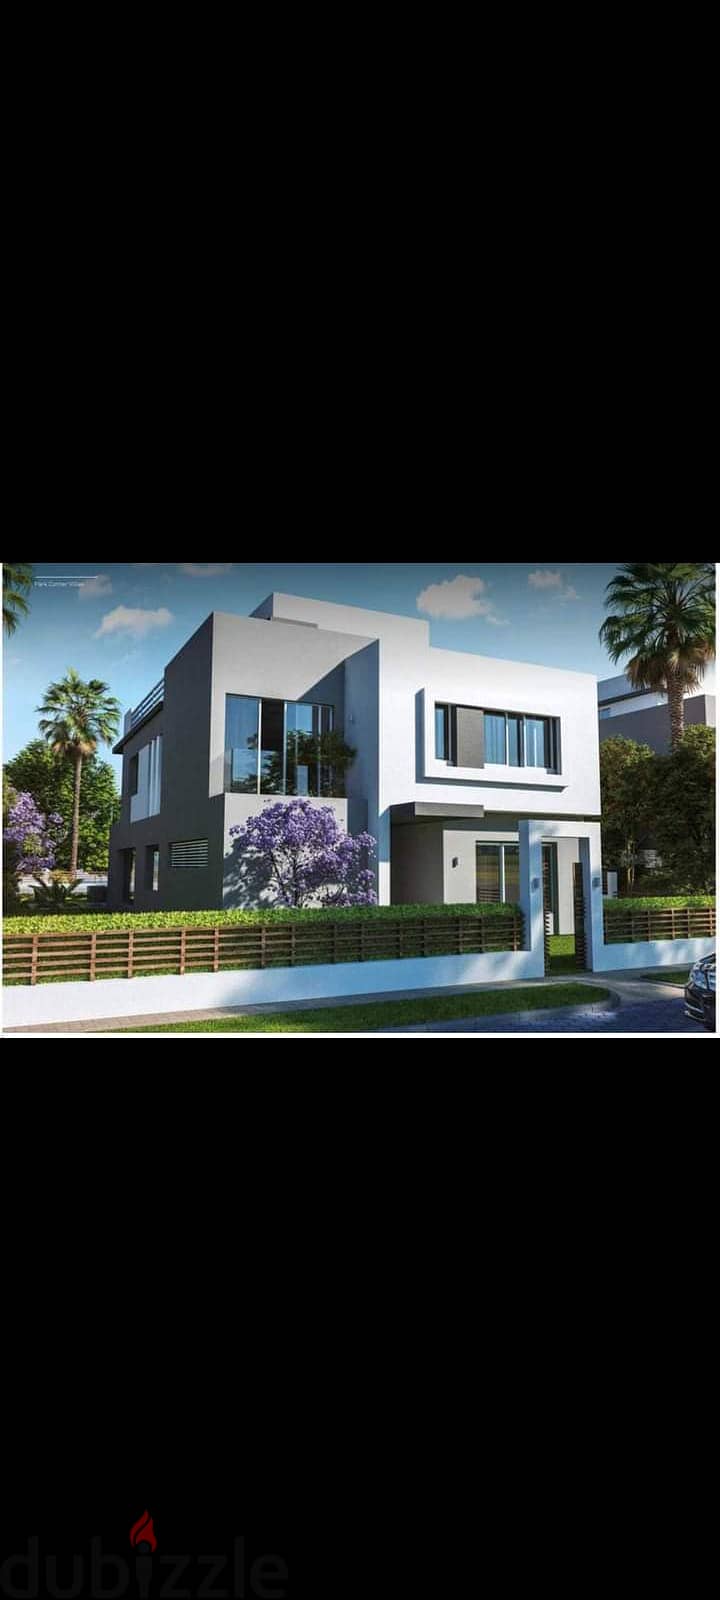 Standalone modern for sale in Hyde Park ,ready to move , under market price , view landscape 6